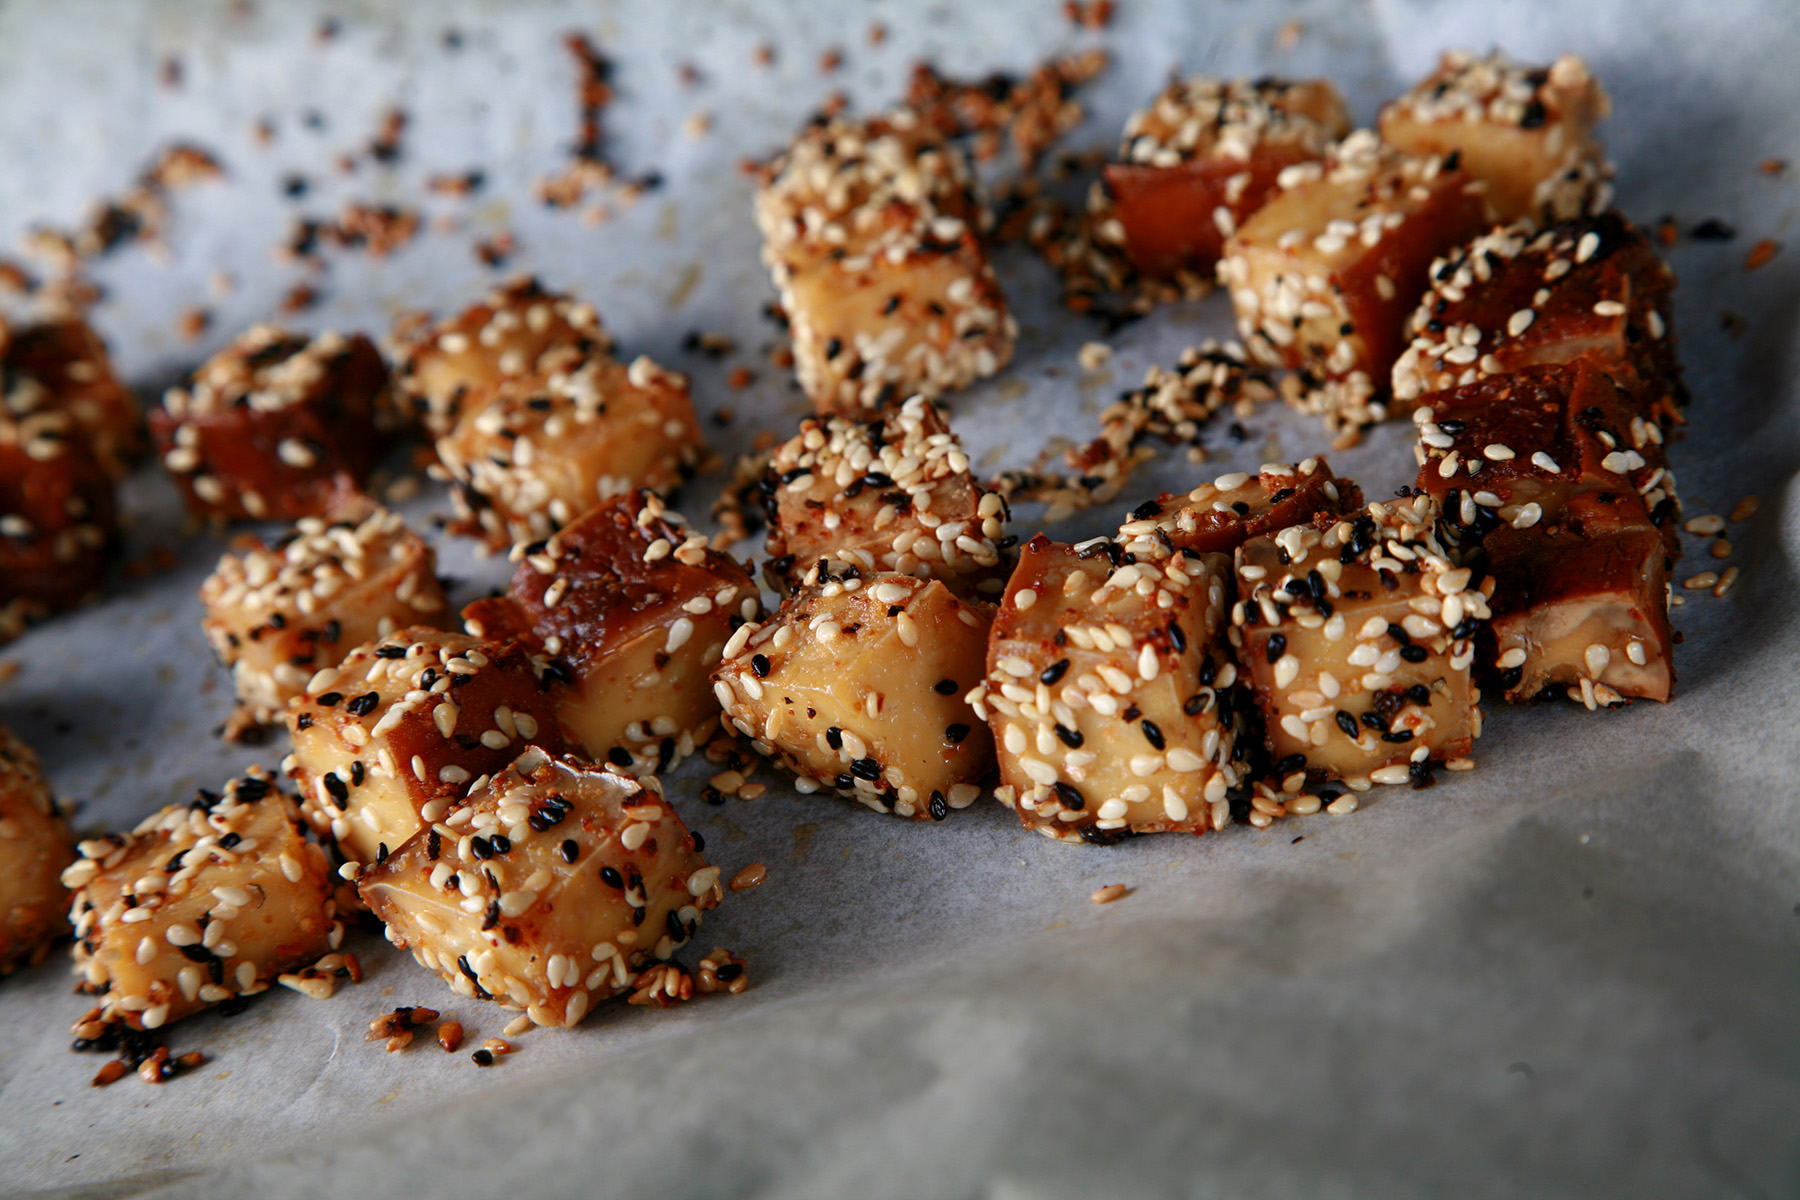 Cubes of smoked tofu on a parchment lined baking sheet. They are coated with sesame seeds.